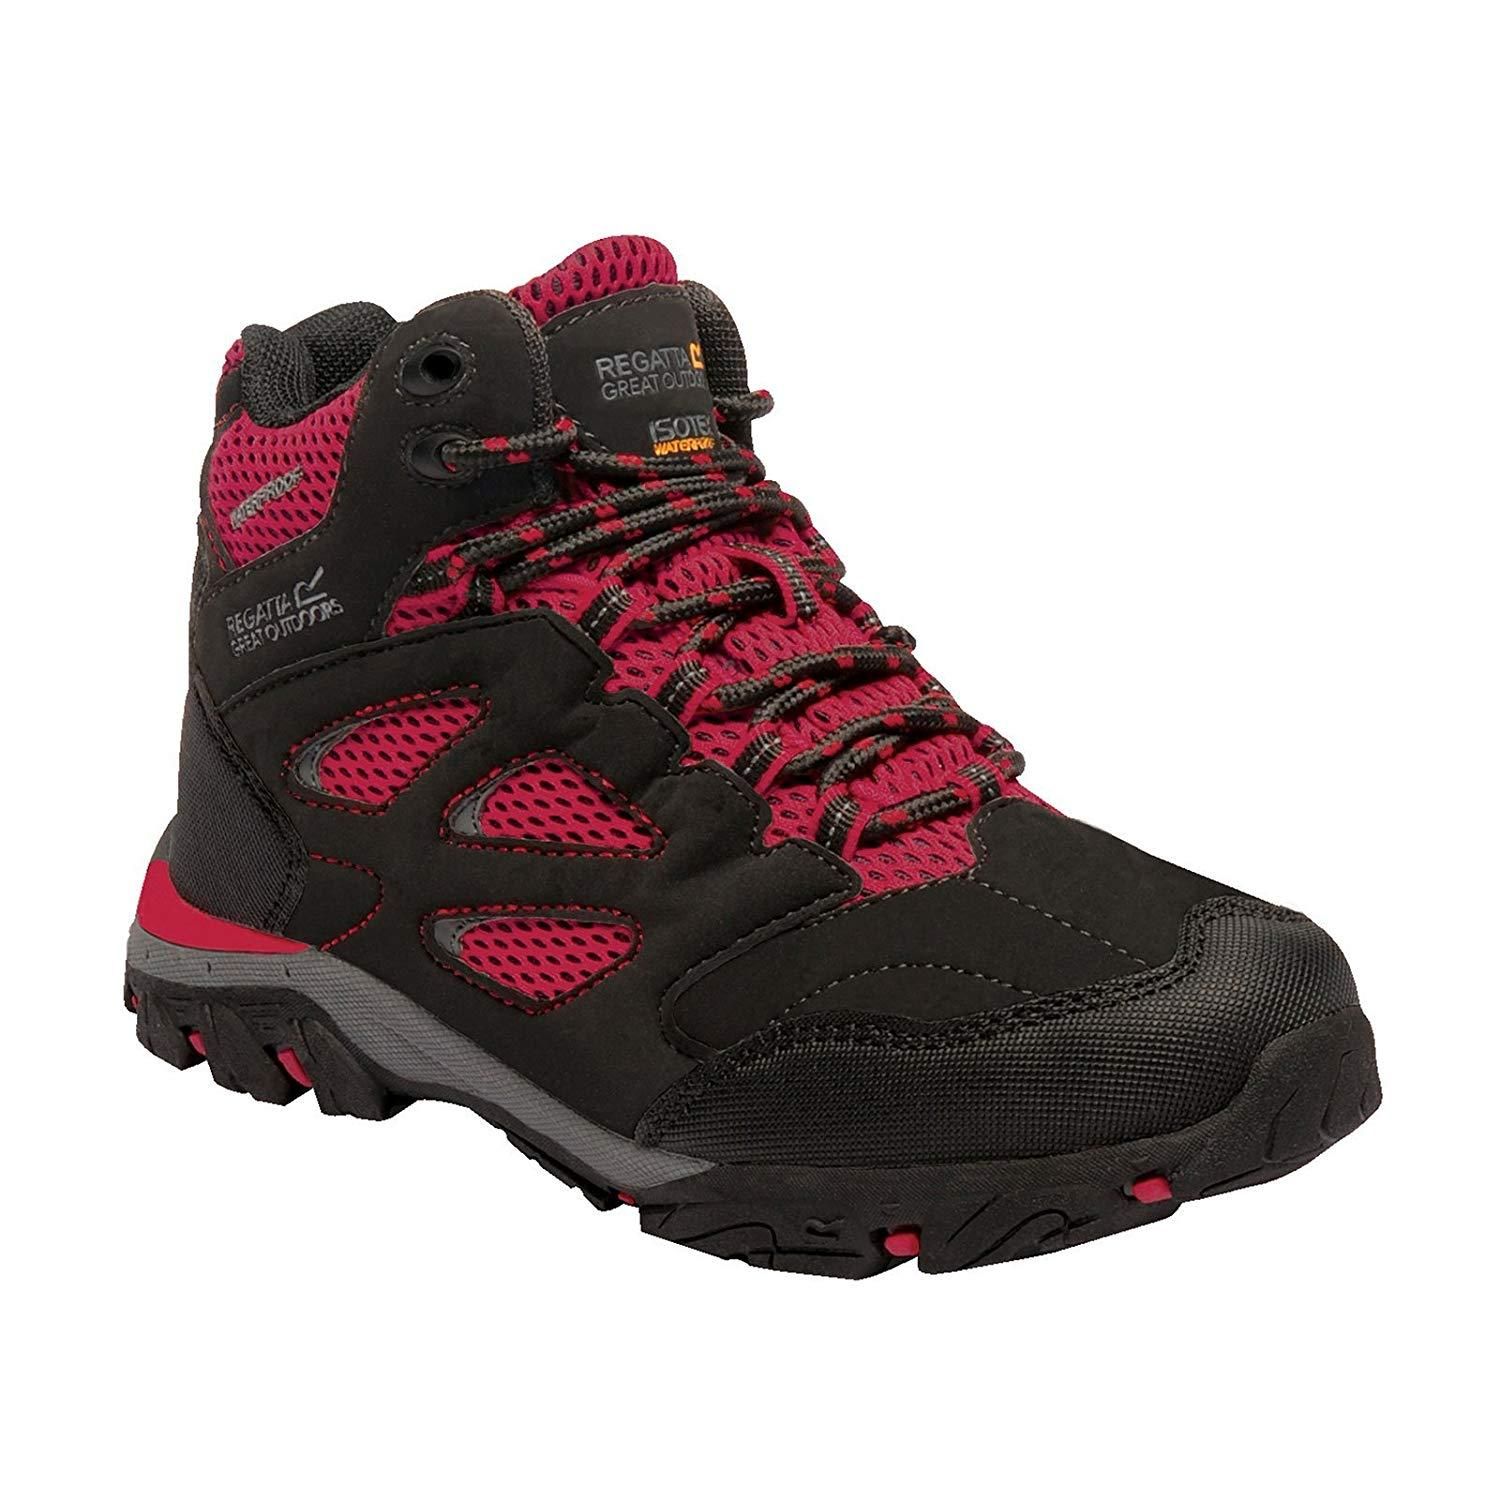 85% Polyurathane, 15% Polyester. Childrens hiking boots made of Isotex waterproof material. Seam sealed with internal membrane bootee liner. Hydropel water resistant technology. Enclosed hardwear for reduced trip hazard. Abrasion toe and heel bumpers. EVA comfort footbed. Stabilising shank technology - (sizes 13 UK Child/32 EU and above). Internal EVA Pocket for underfoot comfort and reduced weight. New rubber outsole with self cleaning properties, angled lugs for propulsion, braking and larger heel grip to spread impact.